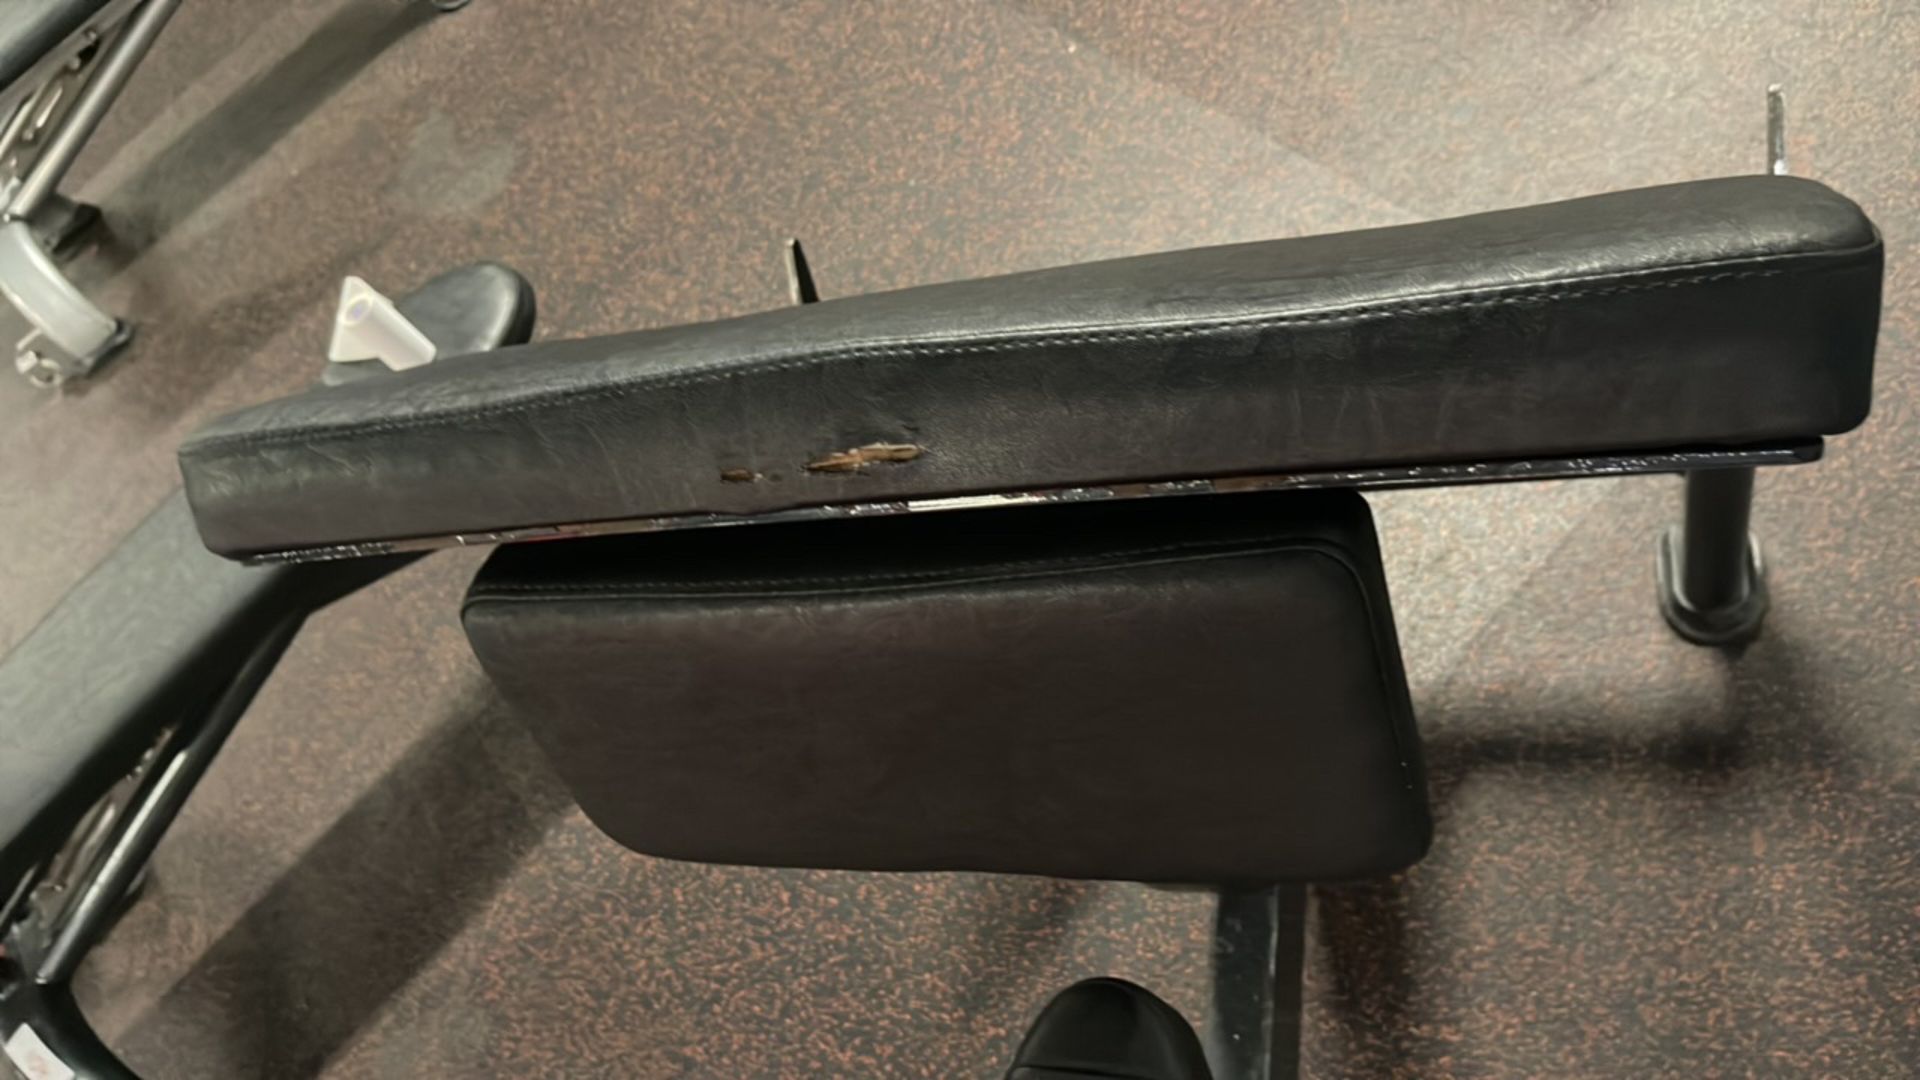 Preacher Curl Station - Image 5 of 5